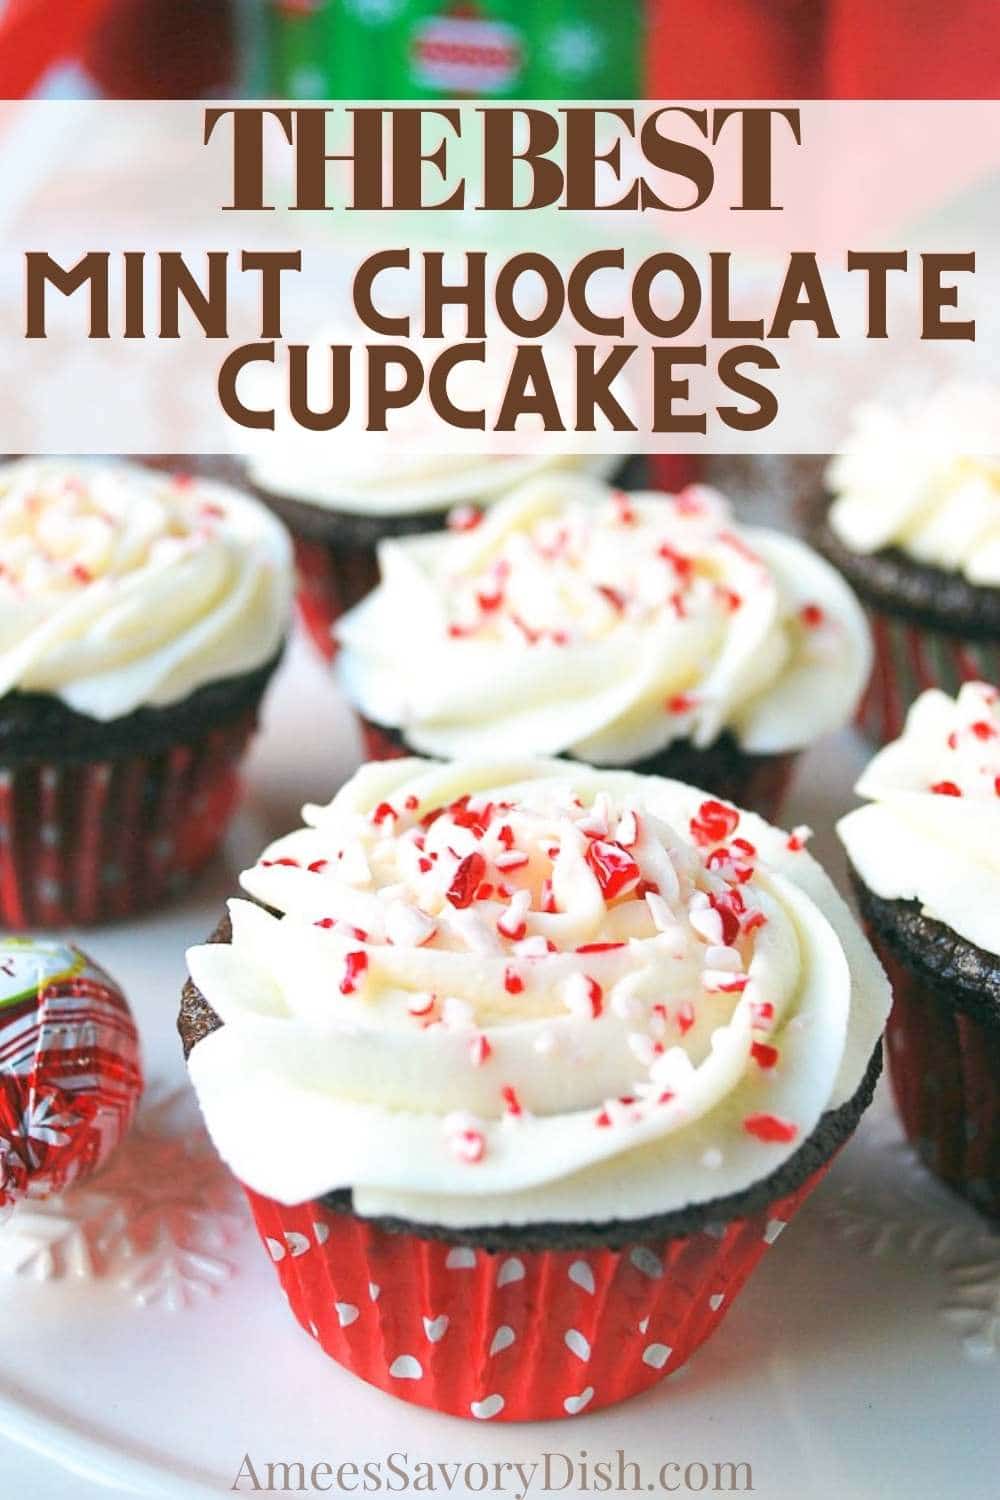 These Mint Chocolate Cupcakes with Peppermint Buttercream Frosting are the only chocolate cupcake recipe you need this holiday season! via @Ameessavorydish